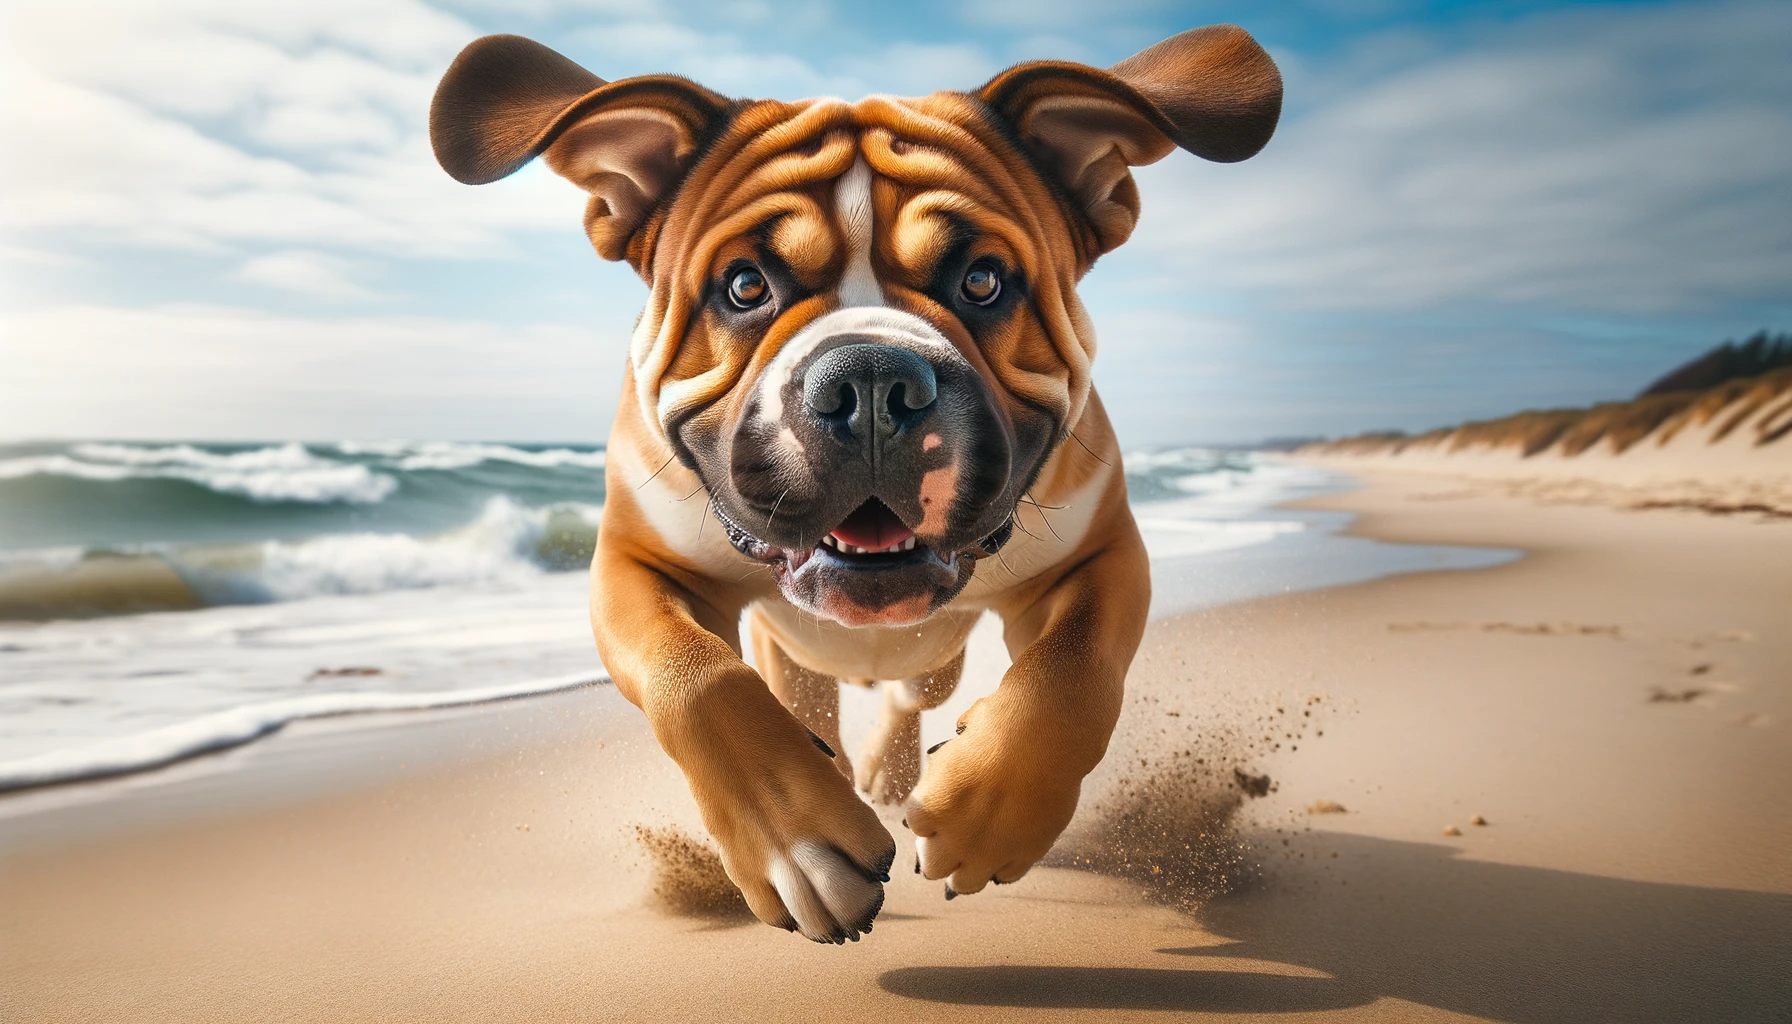 Photo of a dynamic male Bullador dog energetically bounding toward the camera on a sandy beach. His ears flap in the breeze, eyes focused on the viewer, and the ocean waves crash behind him, encapsulating his outgoing and playful nature.